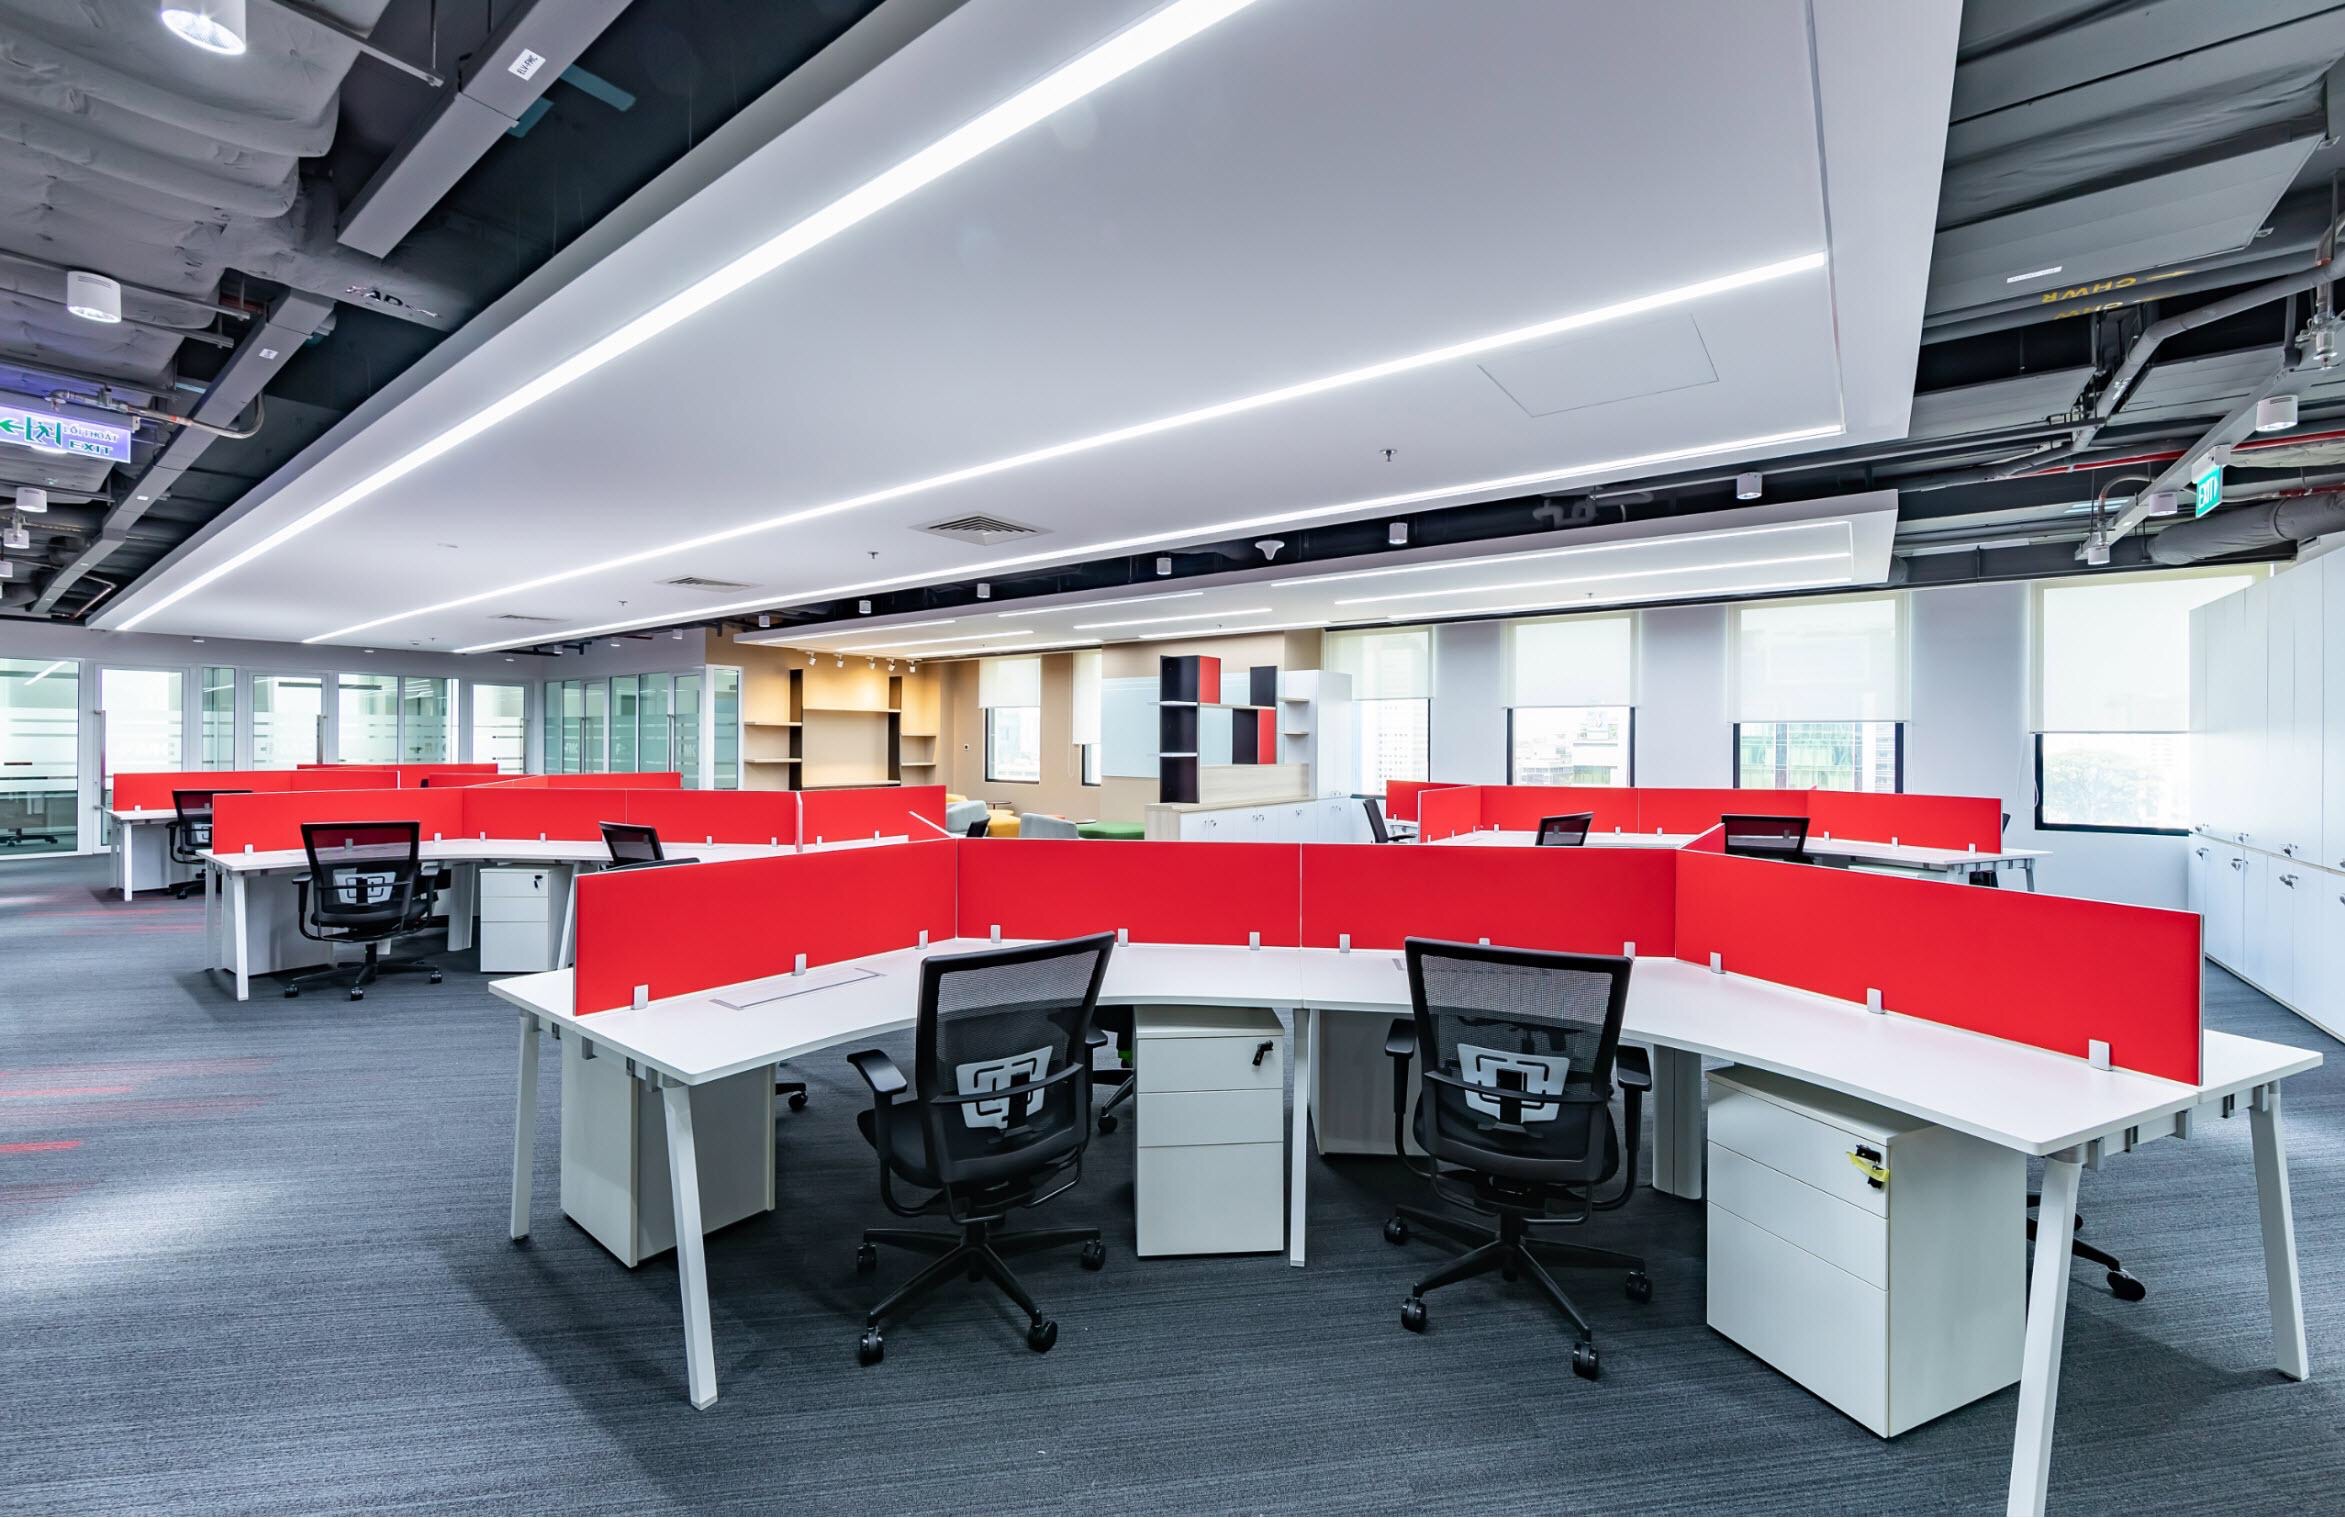 Artiv workstations in red panels with Presa office chairs